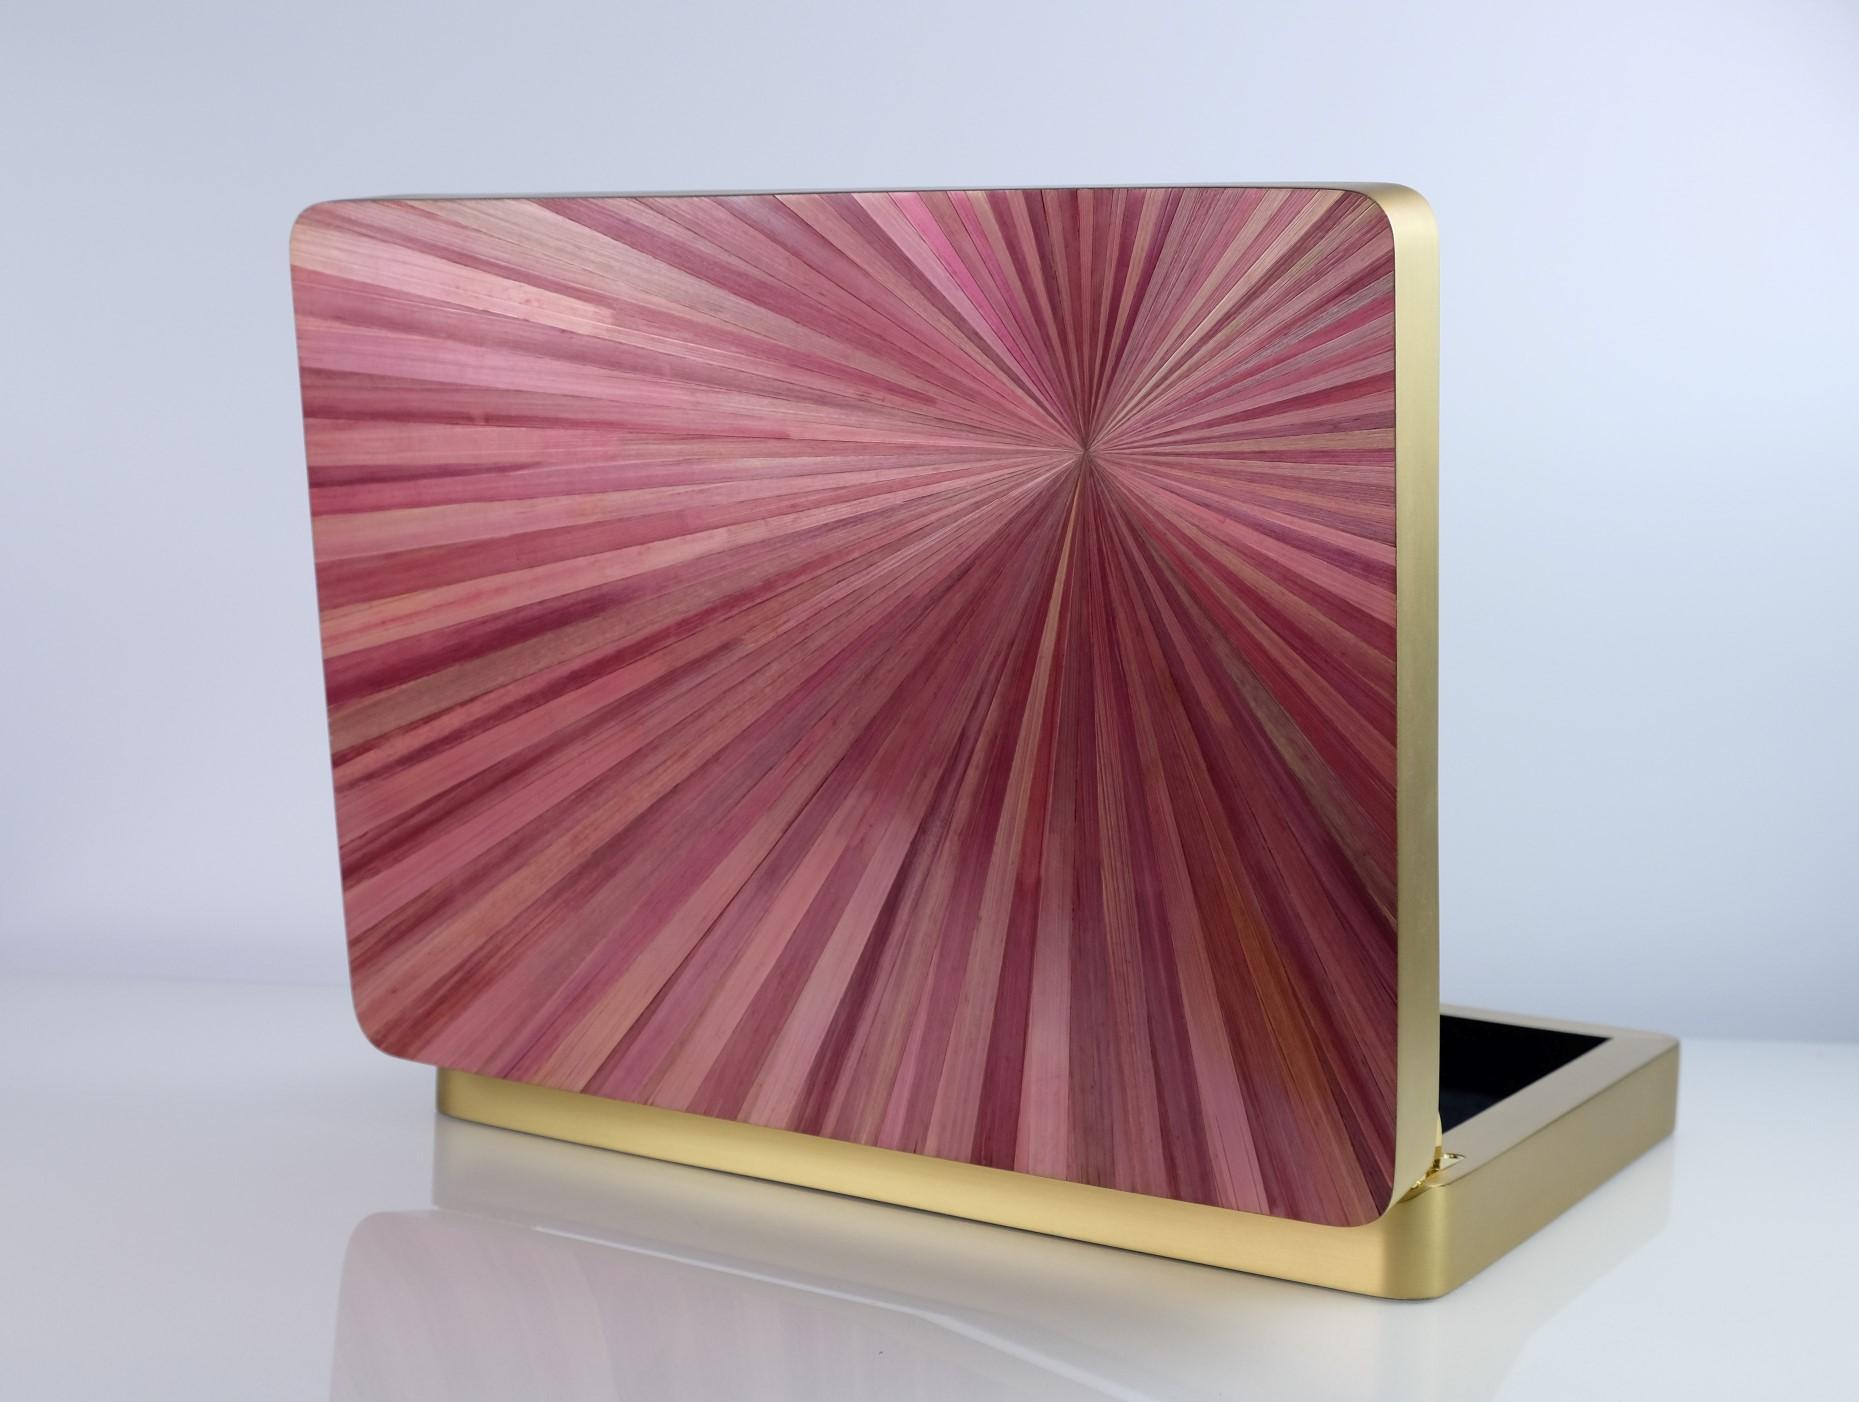 This lovely rectangular brass box with rounded corners, is made of brushed brass with a lid covered of straw marquetry.
The radial design of the straw reminds the great Art deco period while the elegant pink color contrasts perfectly with the gold